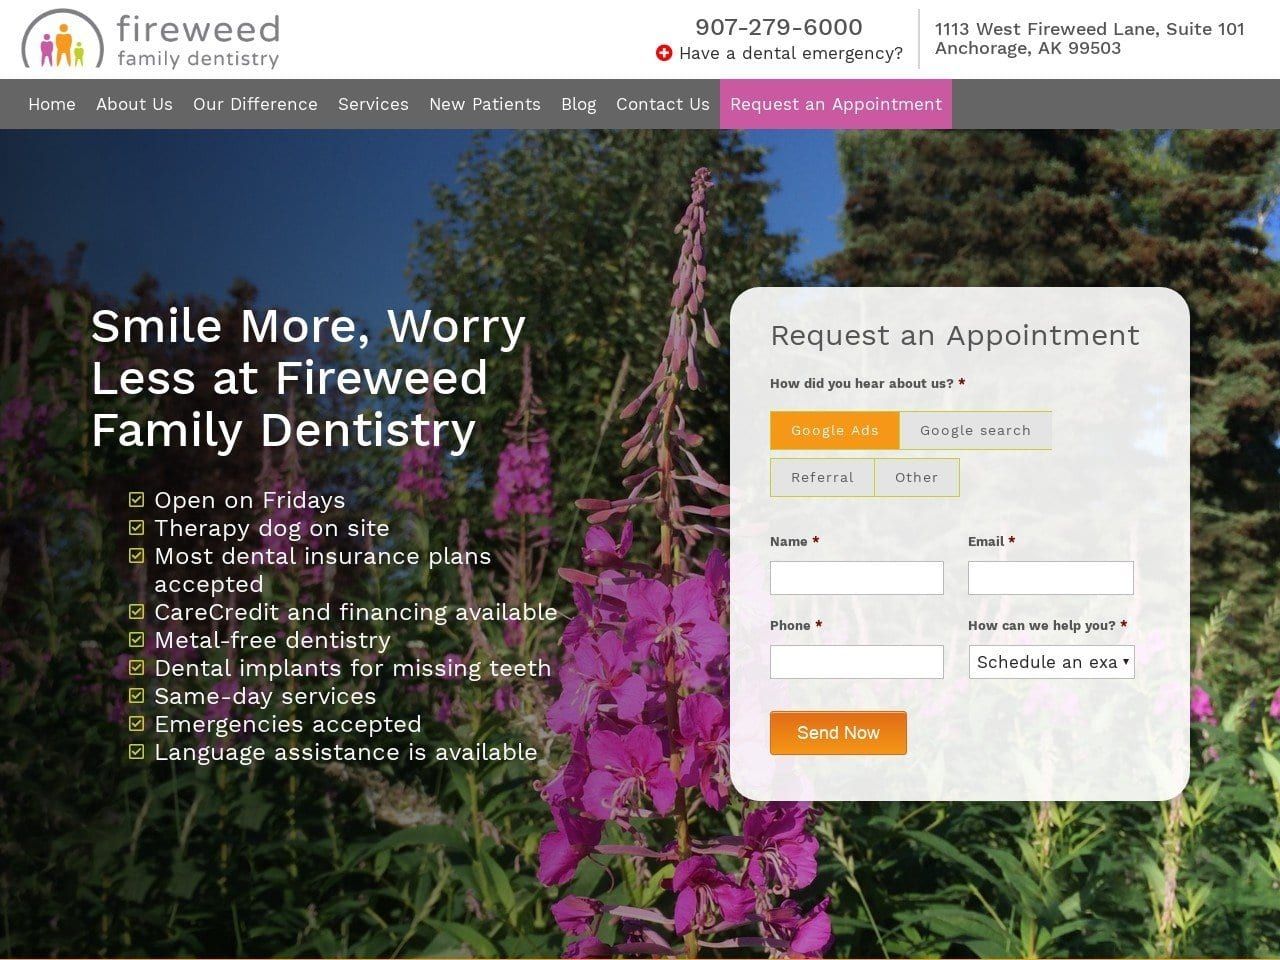 Fireweed Family Dentistry Website Screenshot from fireweeddentistry.com